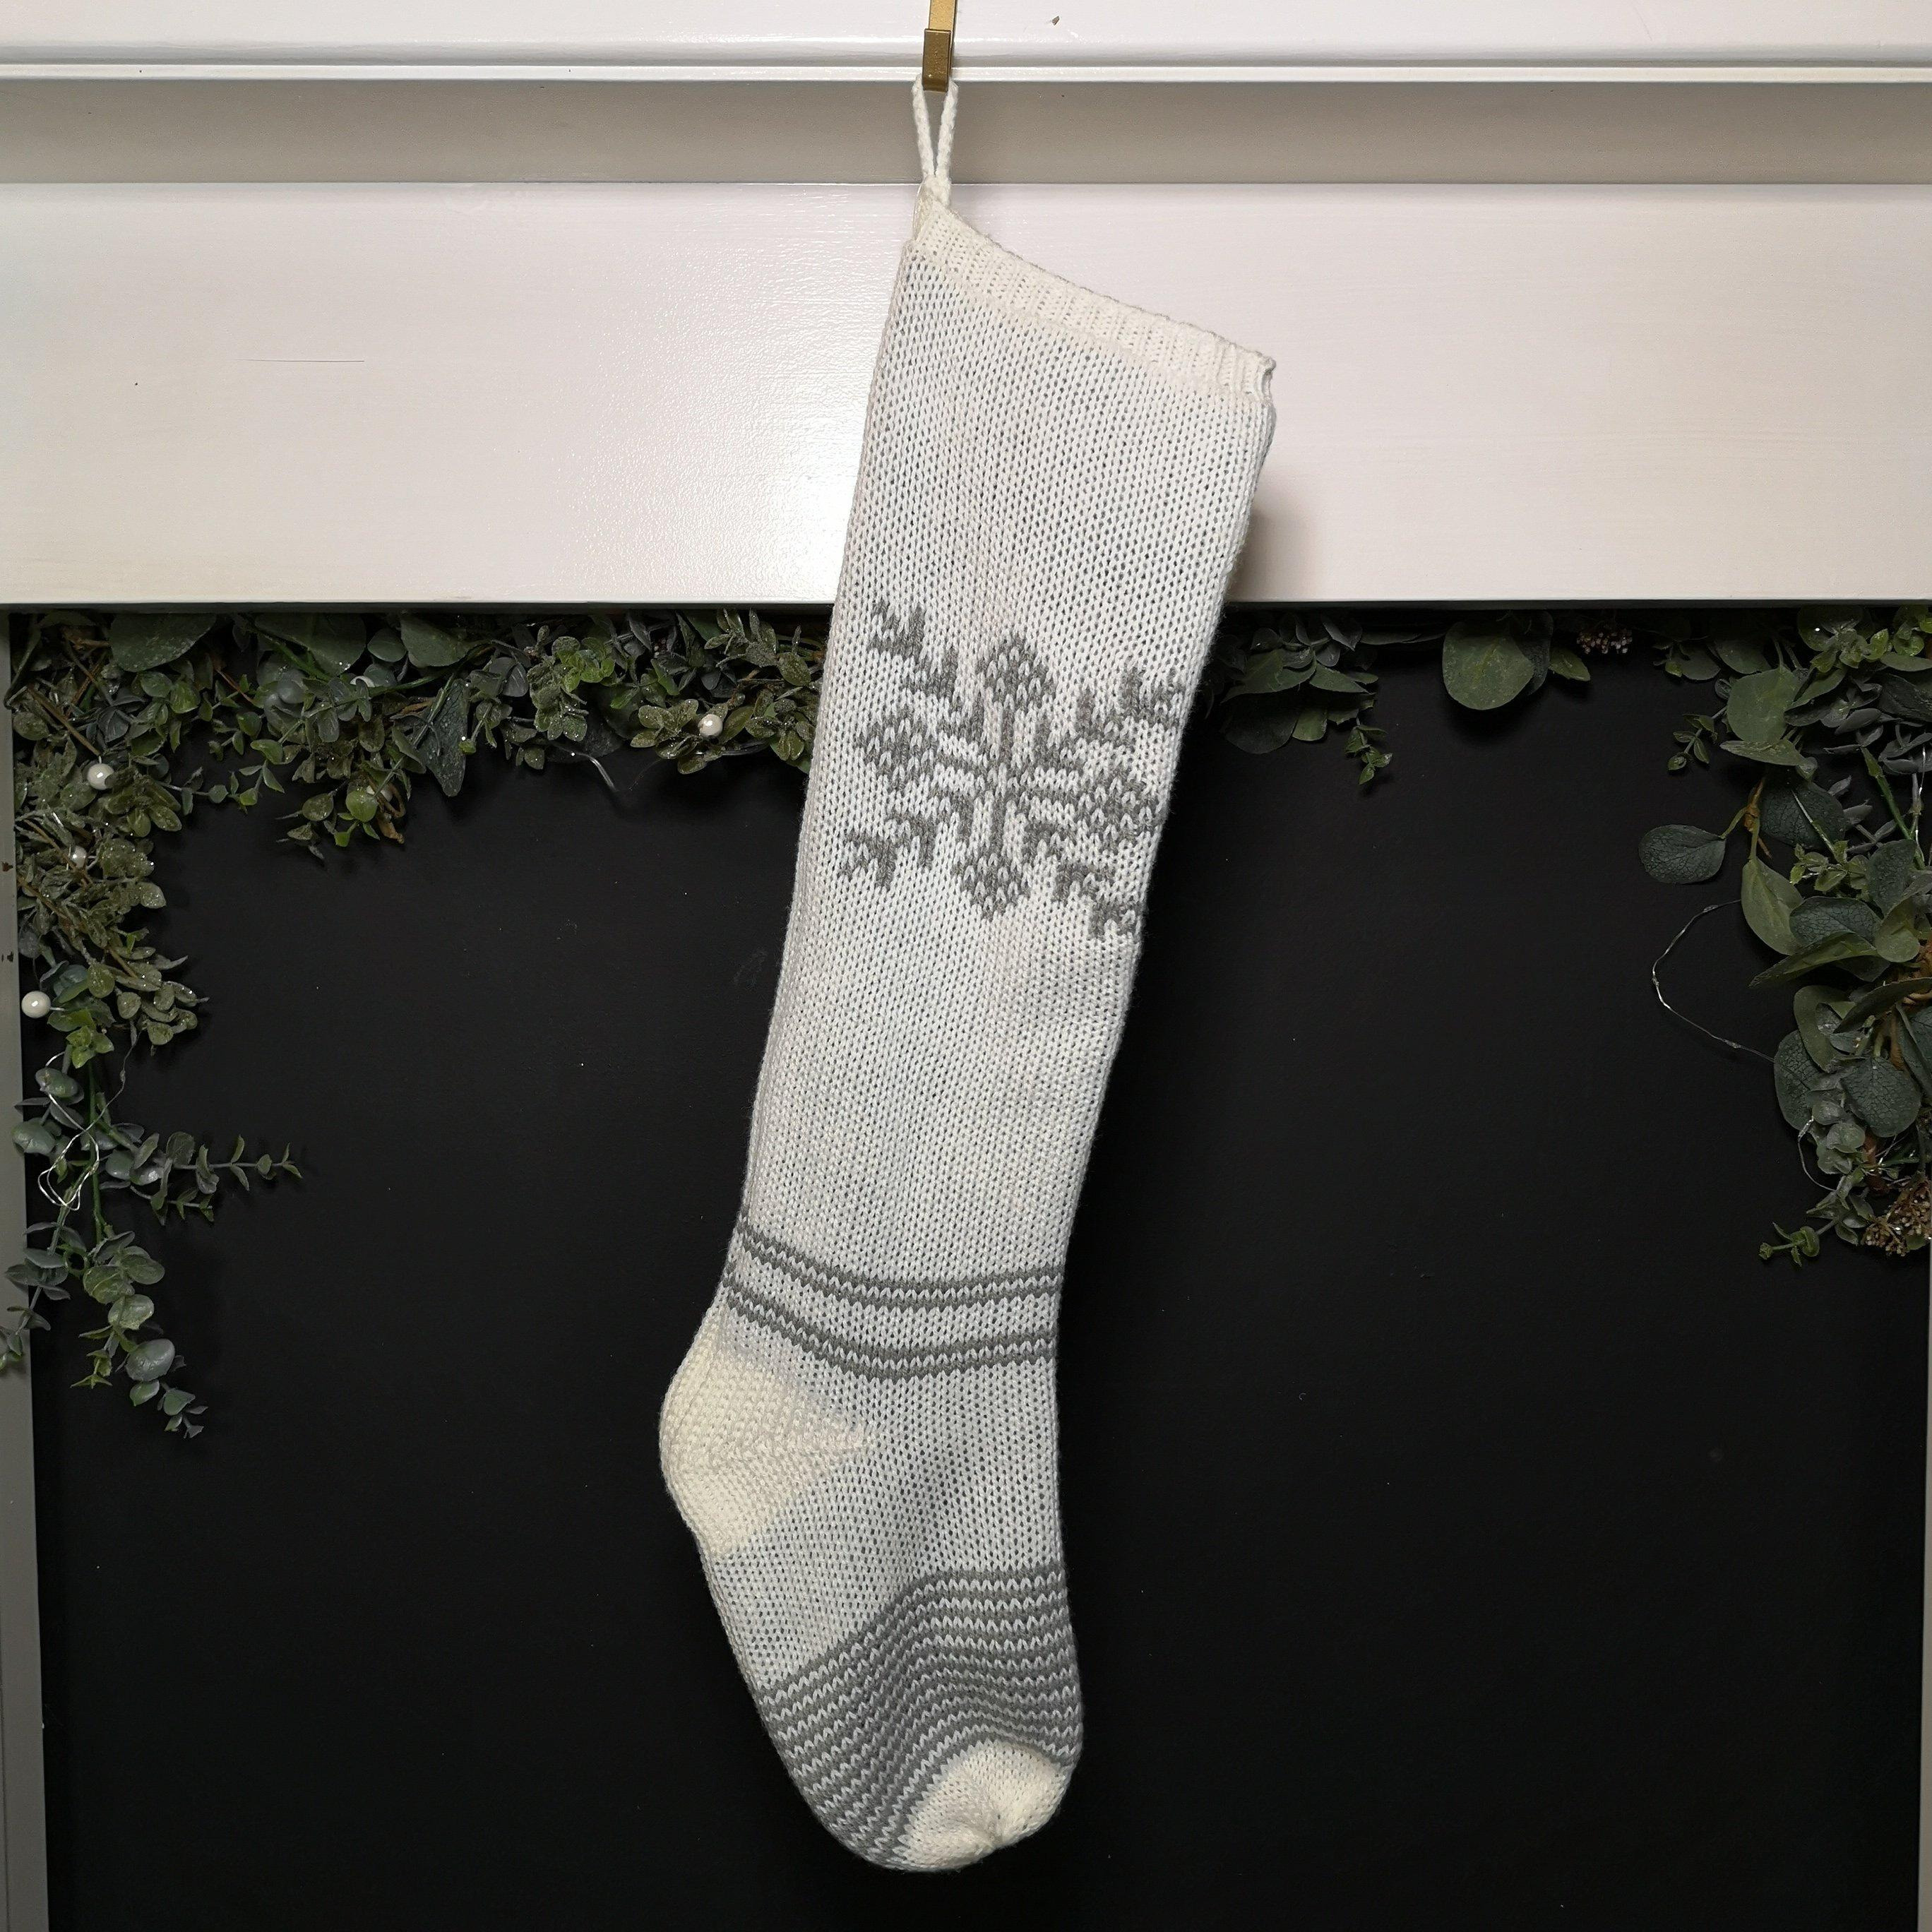 60cm Knitted Christmas Stocking Hanging Decoration with Snowflake Design - image 1